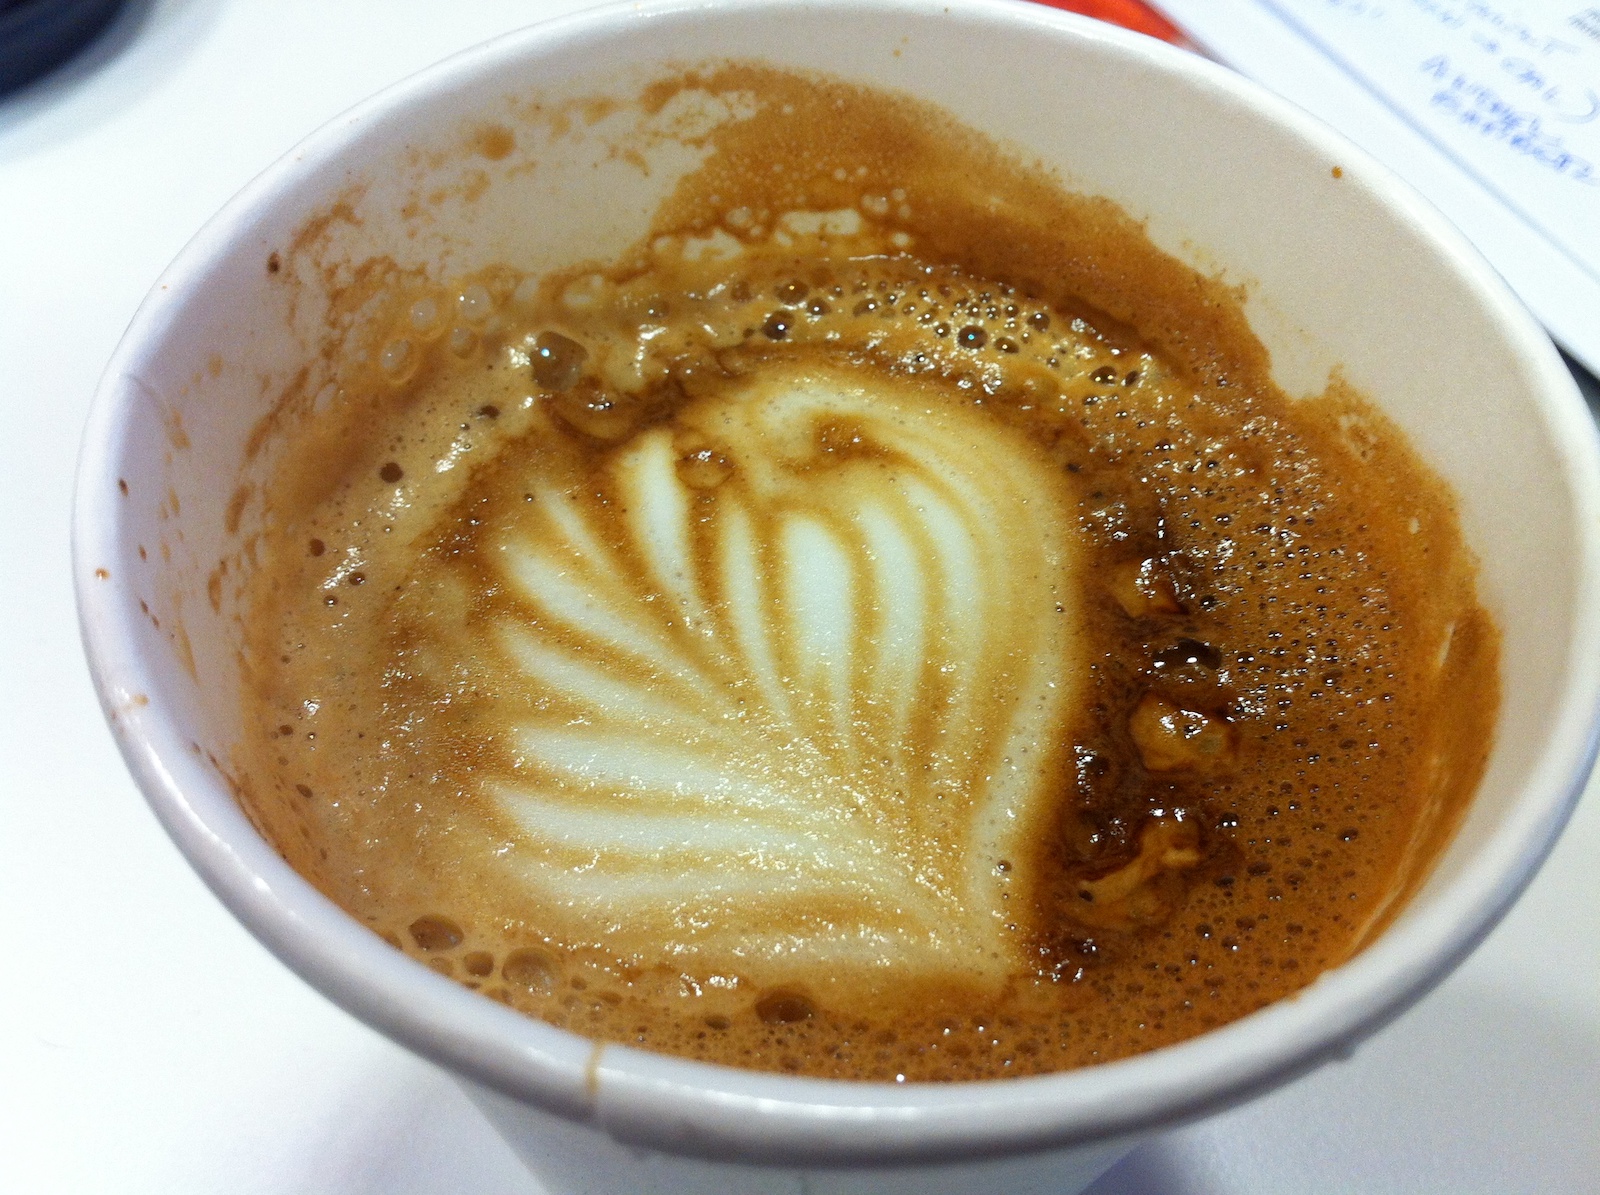 Lovely flatwhite in a paper cup